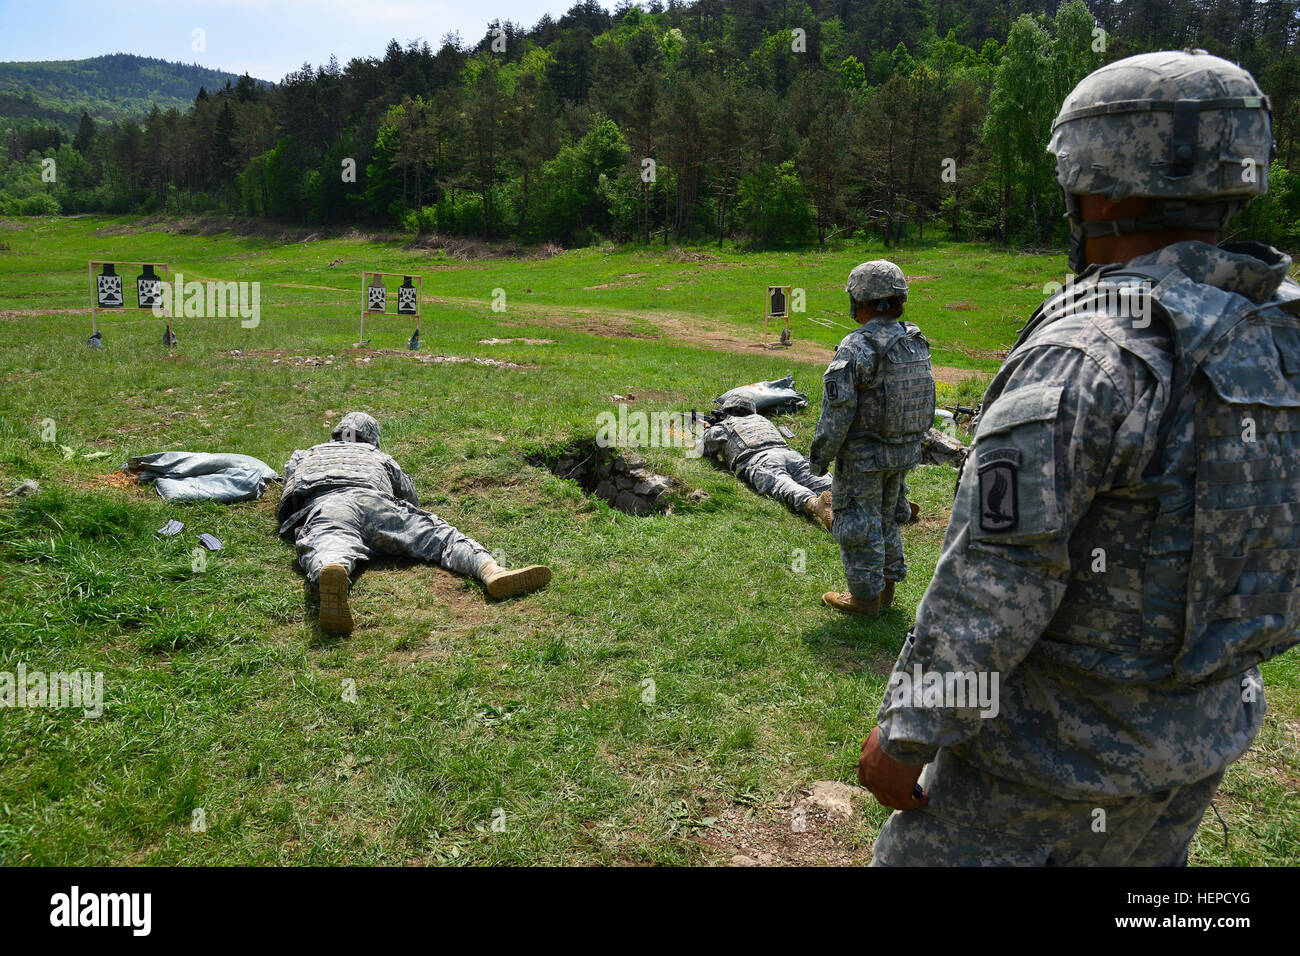 U.S. Army paratroopers assigned to the 173rd Airborne Brigade Support Battalion engage targets with an M4 carbine from the prone position during weapons qualification at Pocek Range in Postonja, Slovenia, May 14, 2015. The brigade is in Slovenia for Neptune Thrust, a combined exercise between the 173rd Airborne Brigade and Slovenian soldiers focused on enhancing interoperability and developing individual technical skills. (U.S. Army photo by Visual Information Specialist Davide Dalla Massara/Released) Neptune Thrust 2015 150514-A-DO858-497 Stock Photo